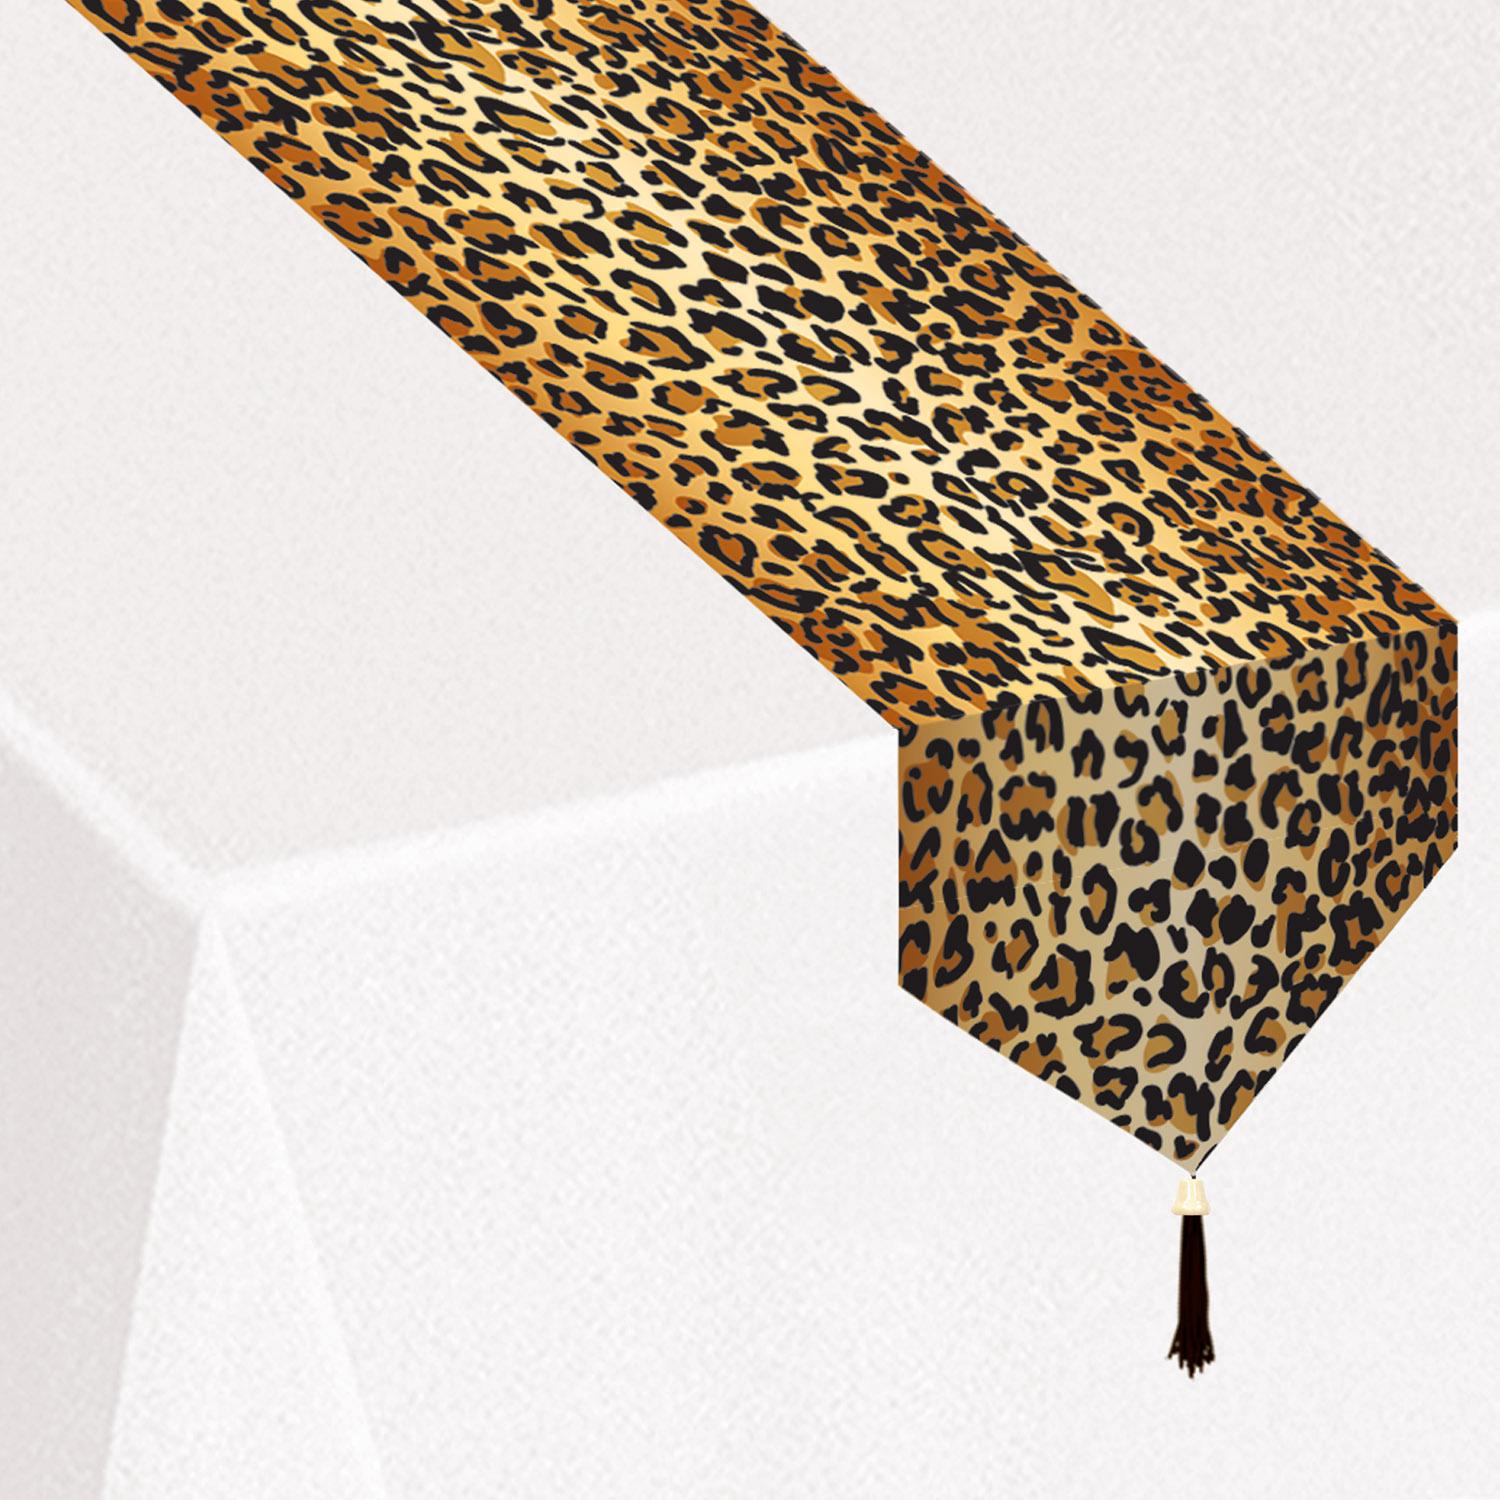 Beistle Printed Leopard Print Party Table Runner